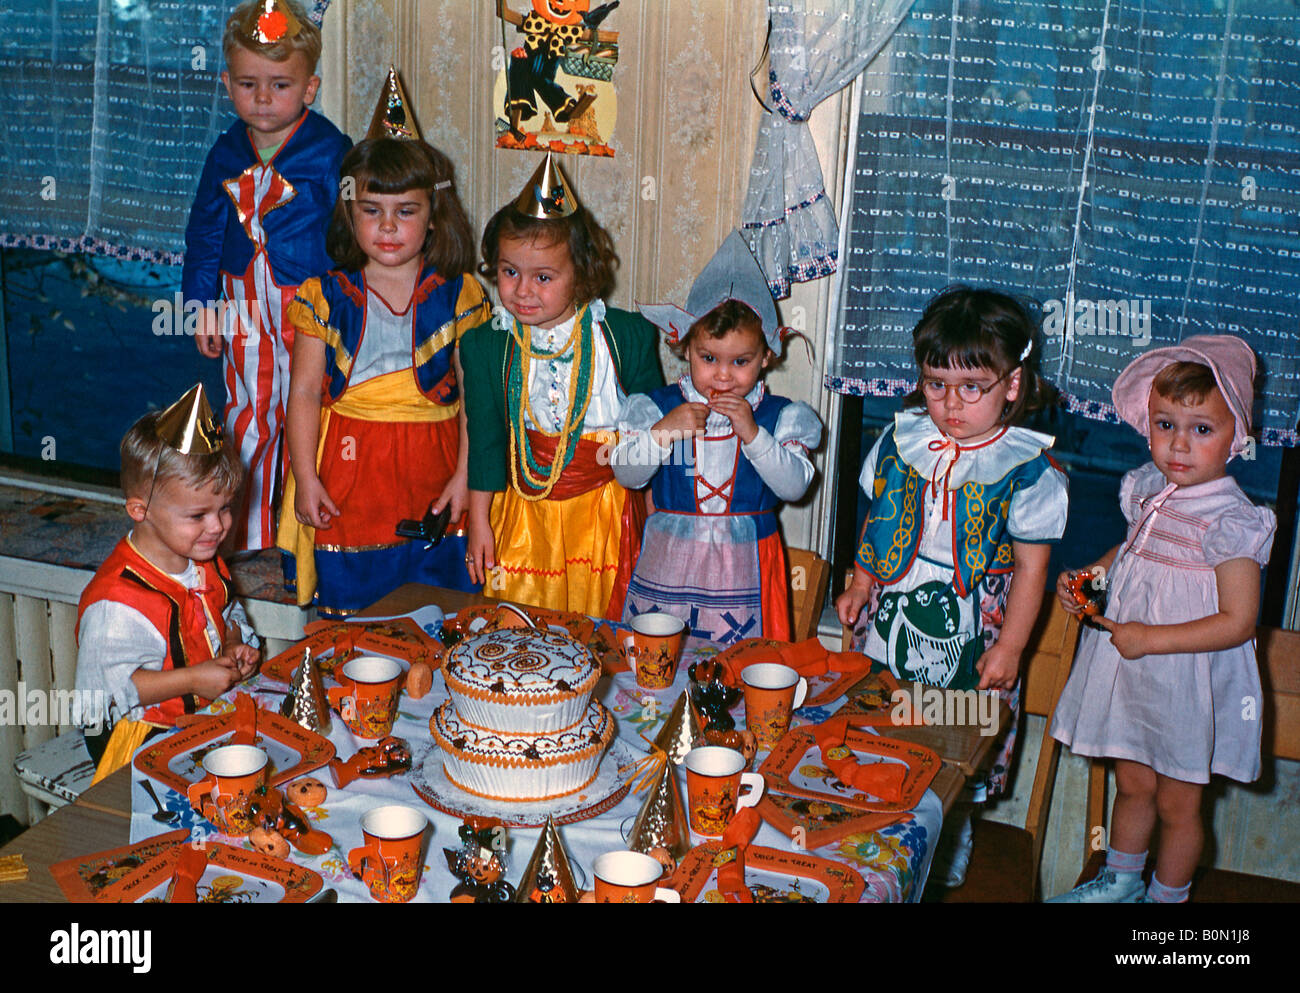 Children and a table set for a Halloween party, USA, 1950s Stock Photo